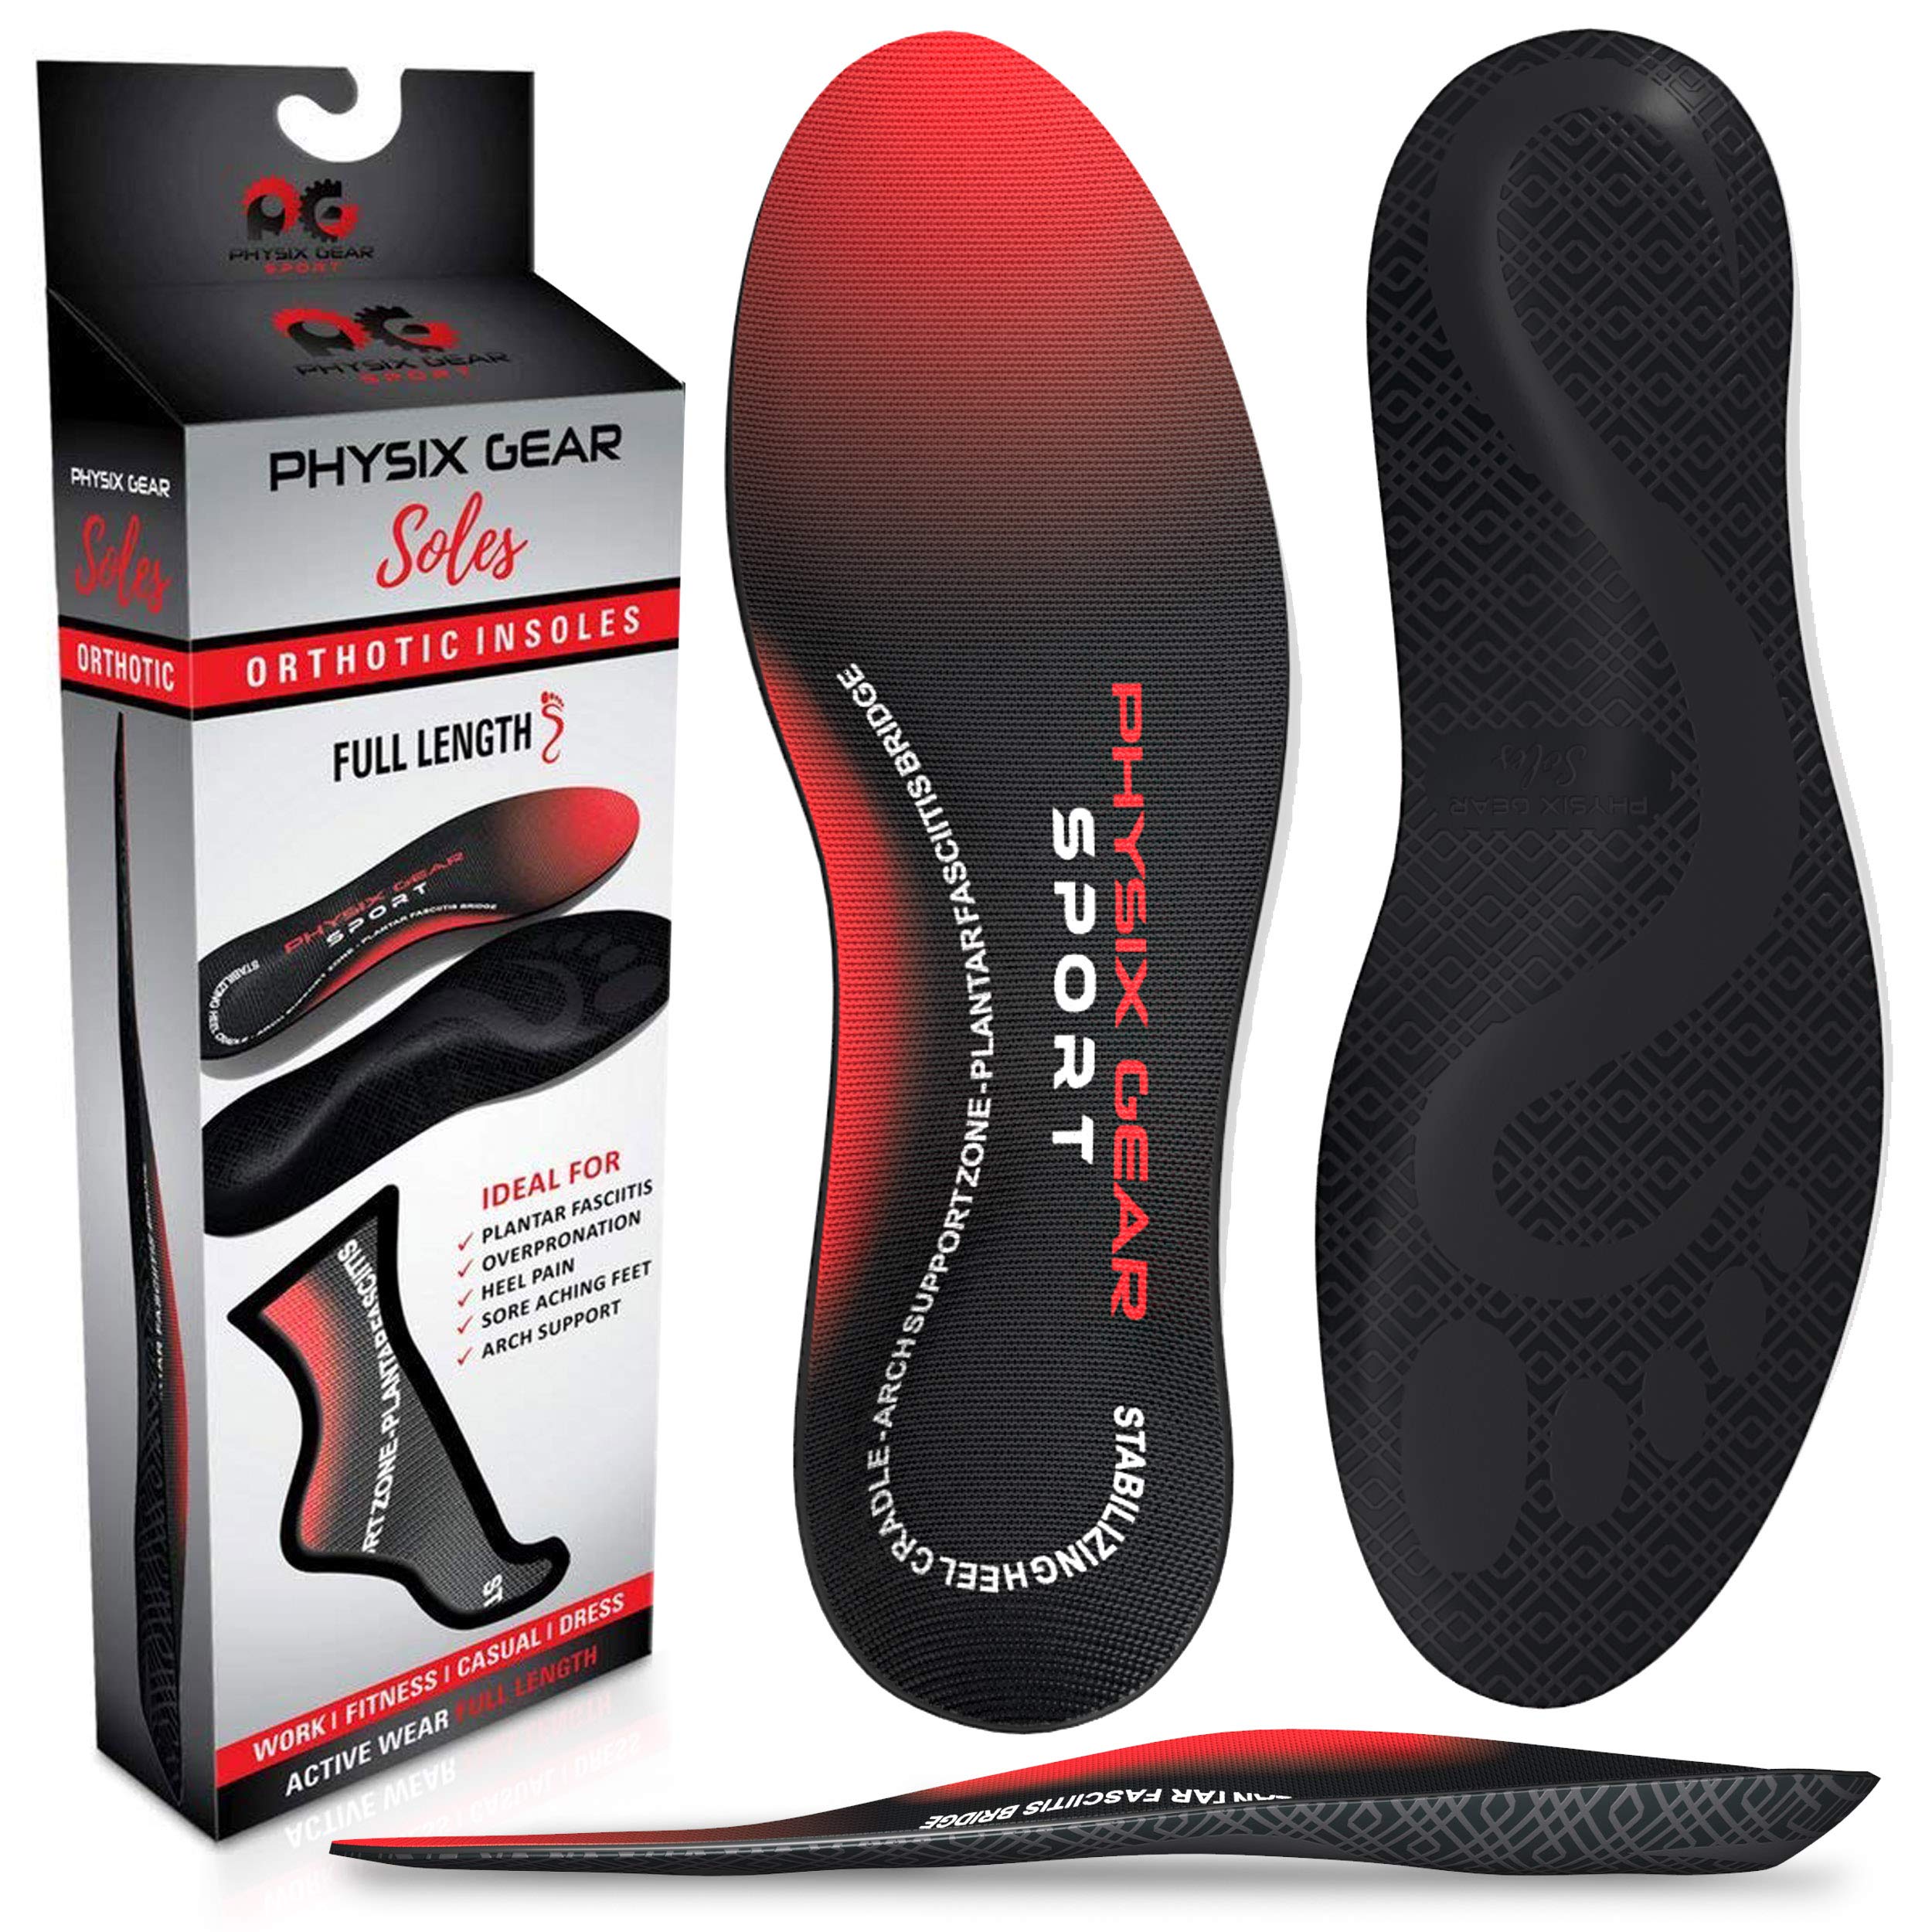 Arch Support Insoles Men & Women by Physix Gear Sport - Orthotic Inserts for Plantar Fasciitis Relief, Flat Foot, High Arches, Shin Splints, Heel Spurs, Sore Feet, Overpronation (1 Pair, X-Small)